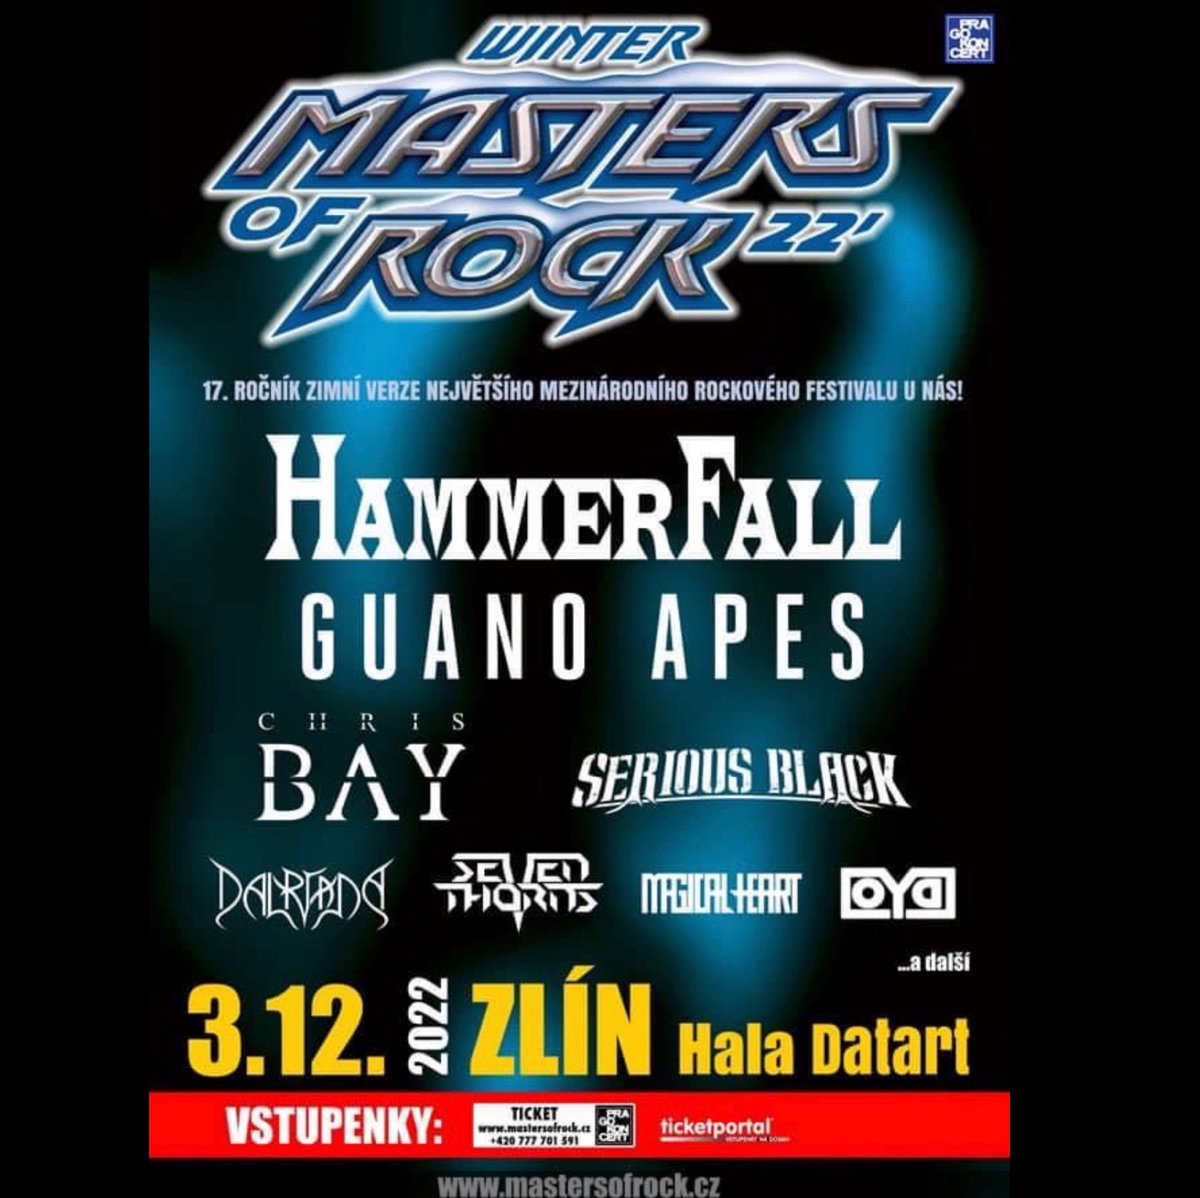 This is what we’ll be doing on Saturday. How about you, will we see you there? 🤘

#HammerFall #HeavyMetal #TemplarsOfSteel #HammerOfDawn #JoacimCans #OscarDronjak #PontusNorgren #FredrikLarsson #DavidWallin #WinterMastersOfRock #Zlin #CzechRepublic